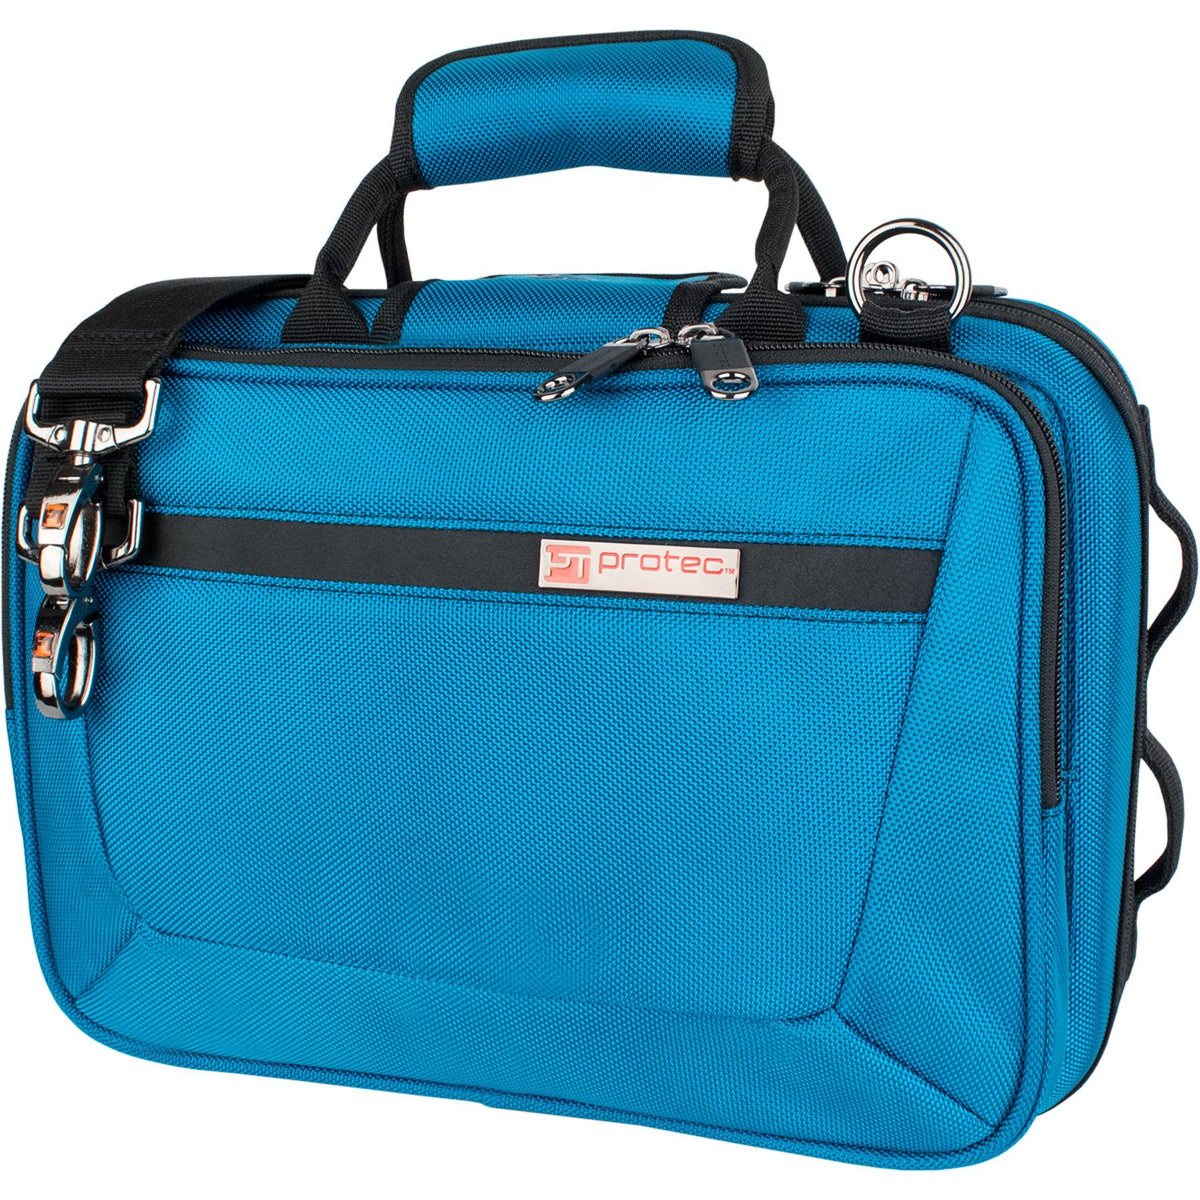 Protec - Bb Clarinet PRO PAC Case (Slimline)-Accessories-Protec-Teal Blue-Music Elements